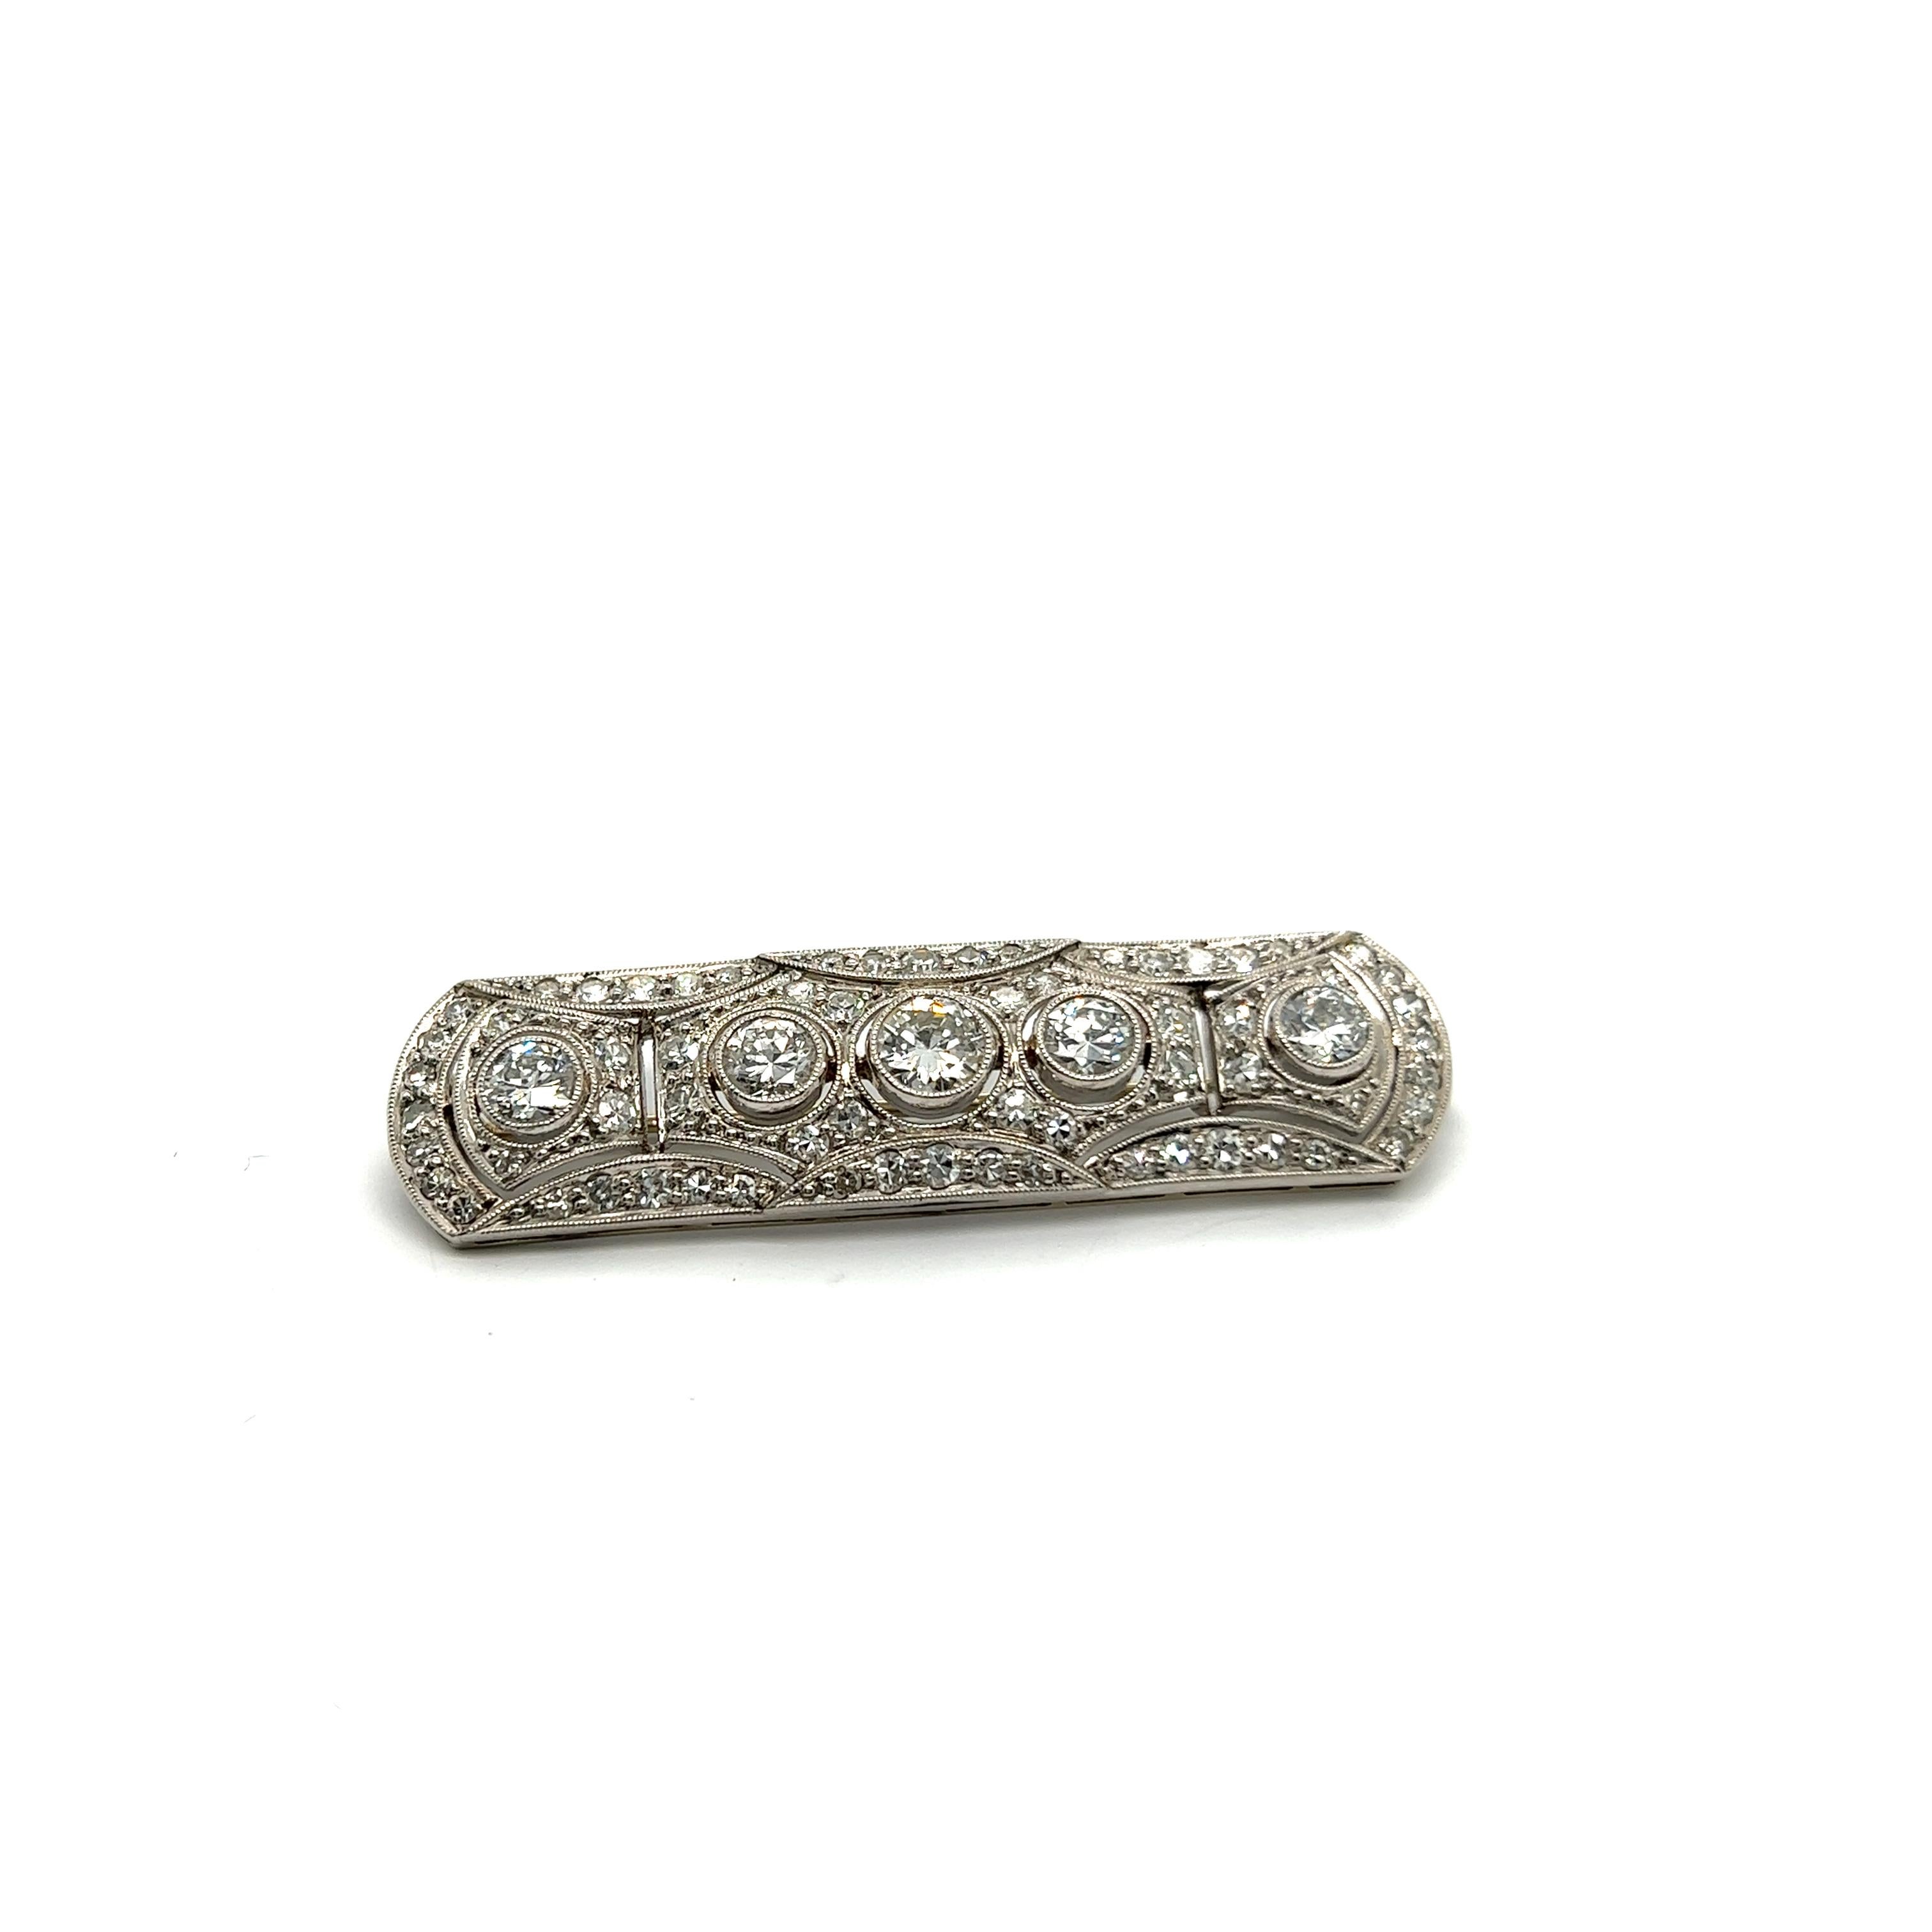 The epitome of elegance, this Art Deco Brooch with diamonds is an exquisite masterpiece that captivates with its sophistication. Crafted in lustrous platinum and gold, it sparkles with a constellation of old-cut diamonds totaling 2.29 carats. The